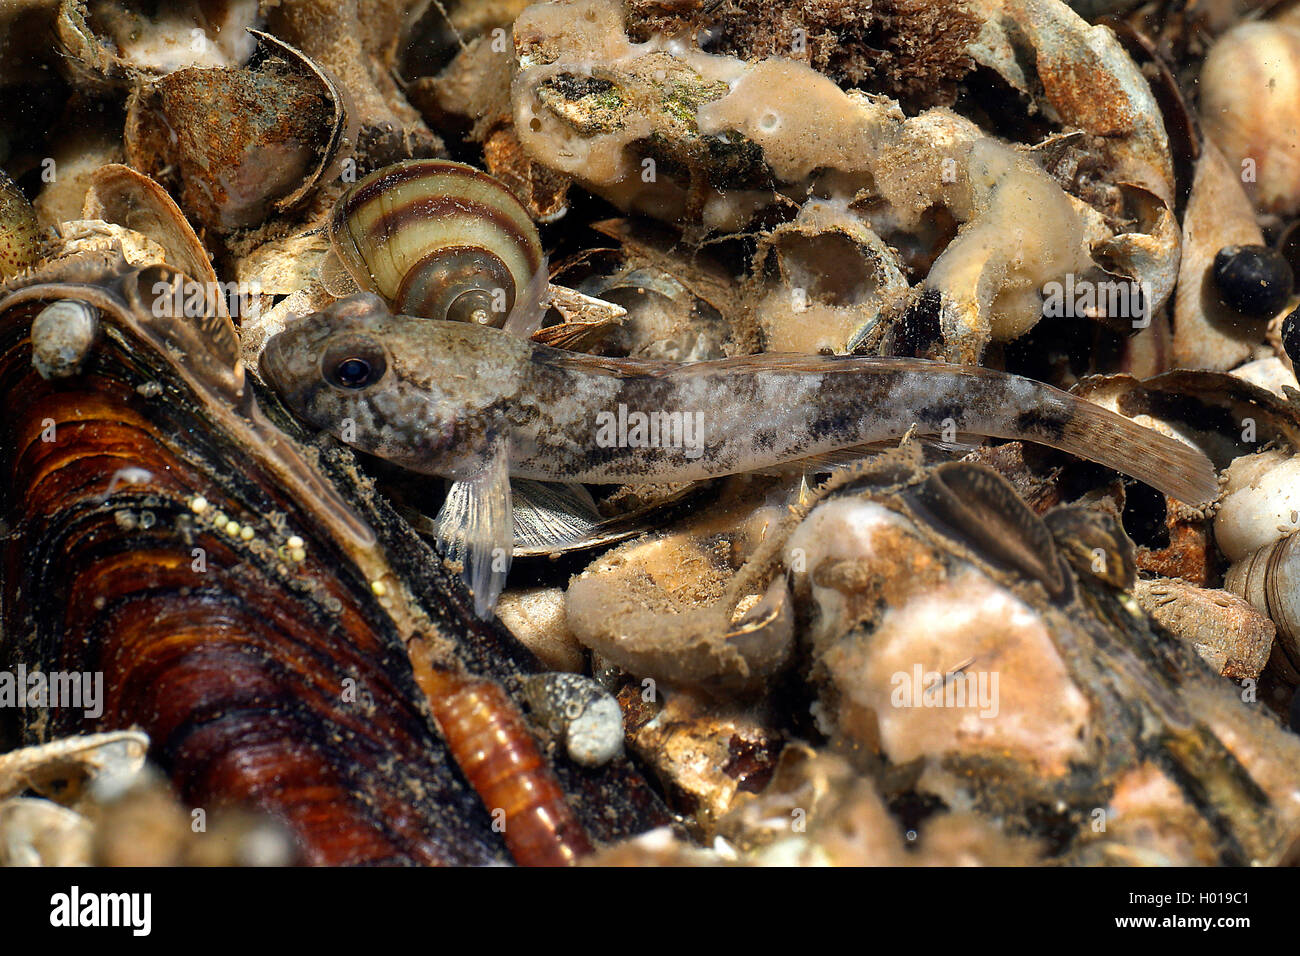 Racer goby (Neogobius gymnotrachelus), on chonchs and snailshells at the bottom, Romania, Danube Delta Stock Photo